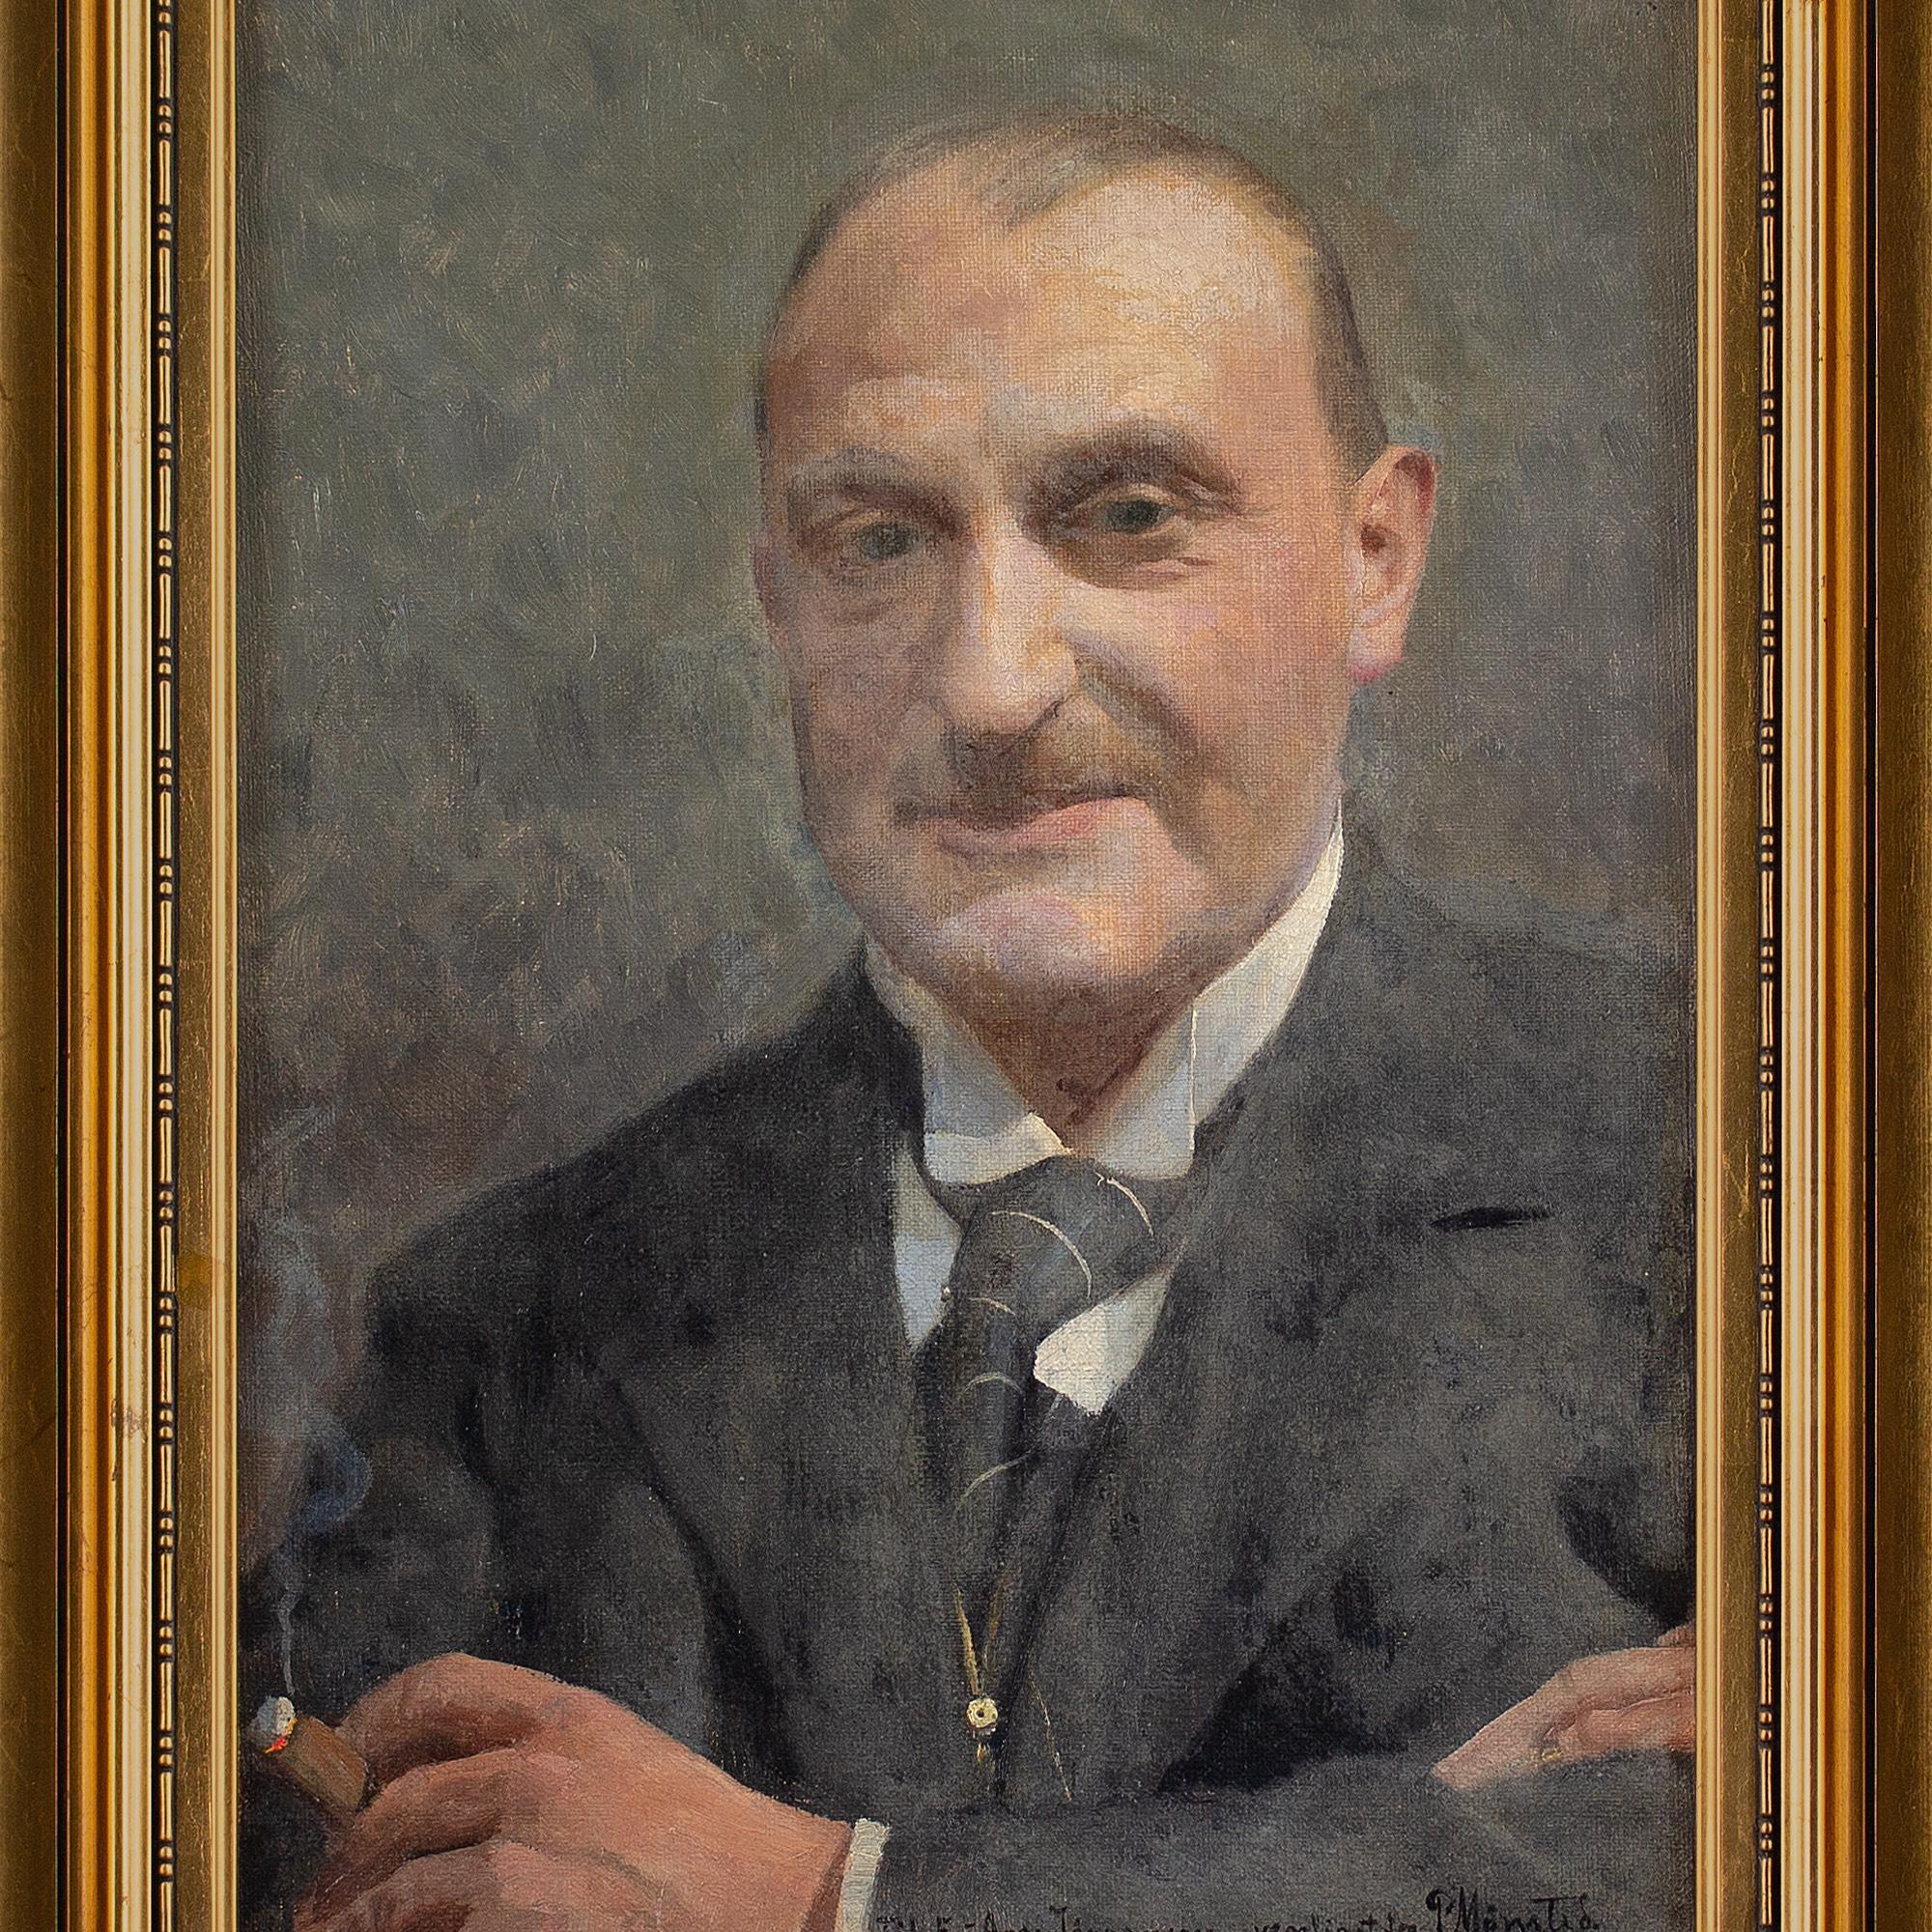 This early 20th-century portrait by eminent Danish artist Peter (Peder Mork) Mønsted (1859-1941) depicts local dignitary Aage Jørgensen (1879-1960). It’s an informal portrayal that suggests an established friendship.

Jørgensen was a